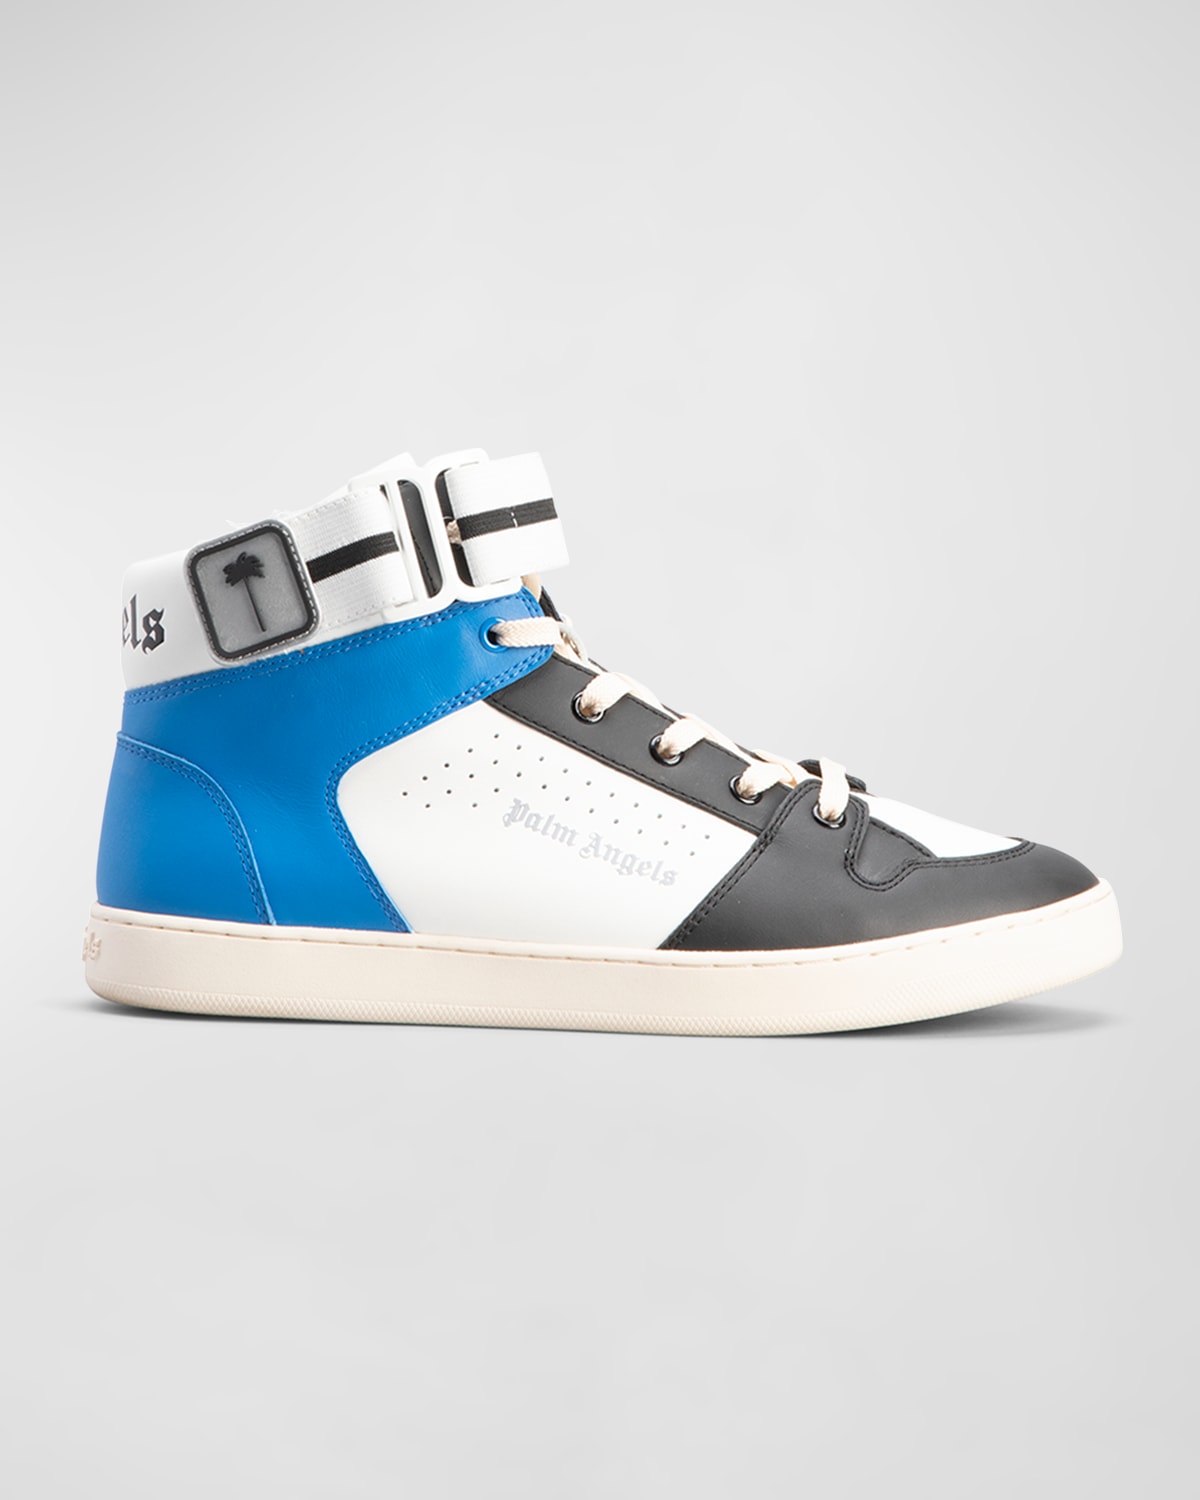 Men's Palm 1 Colorblock Leather High-Top Sneakers